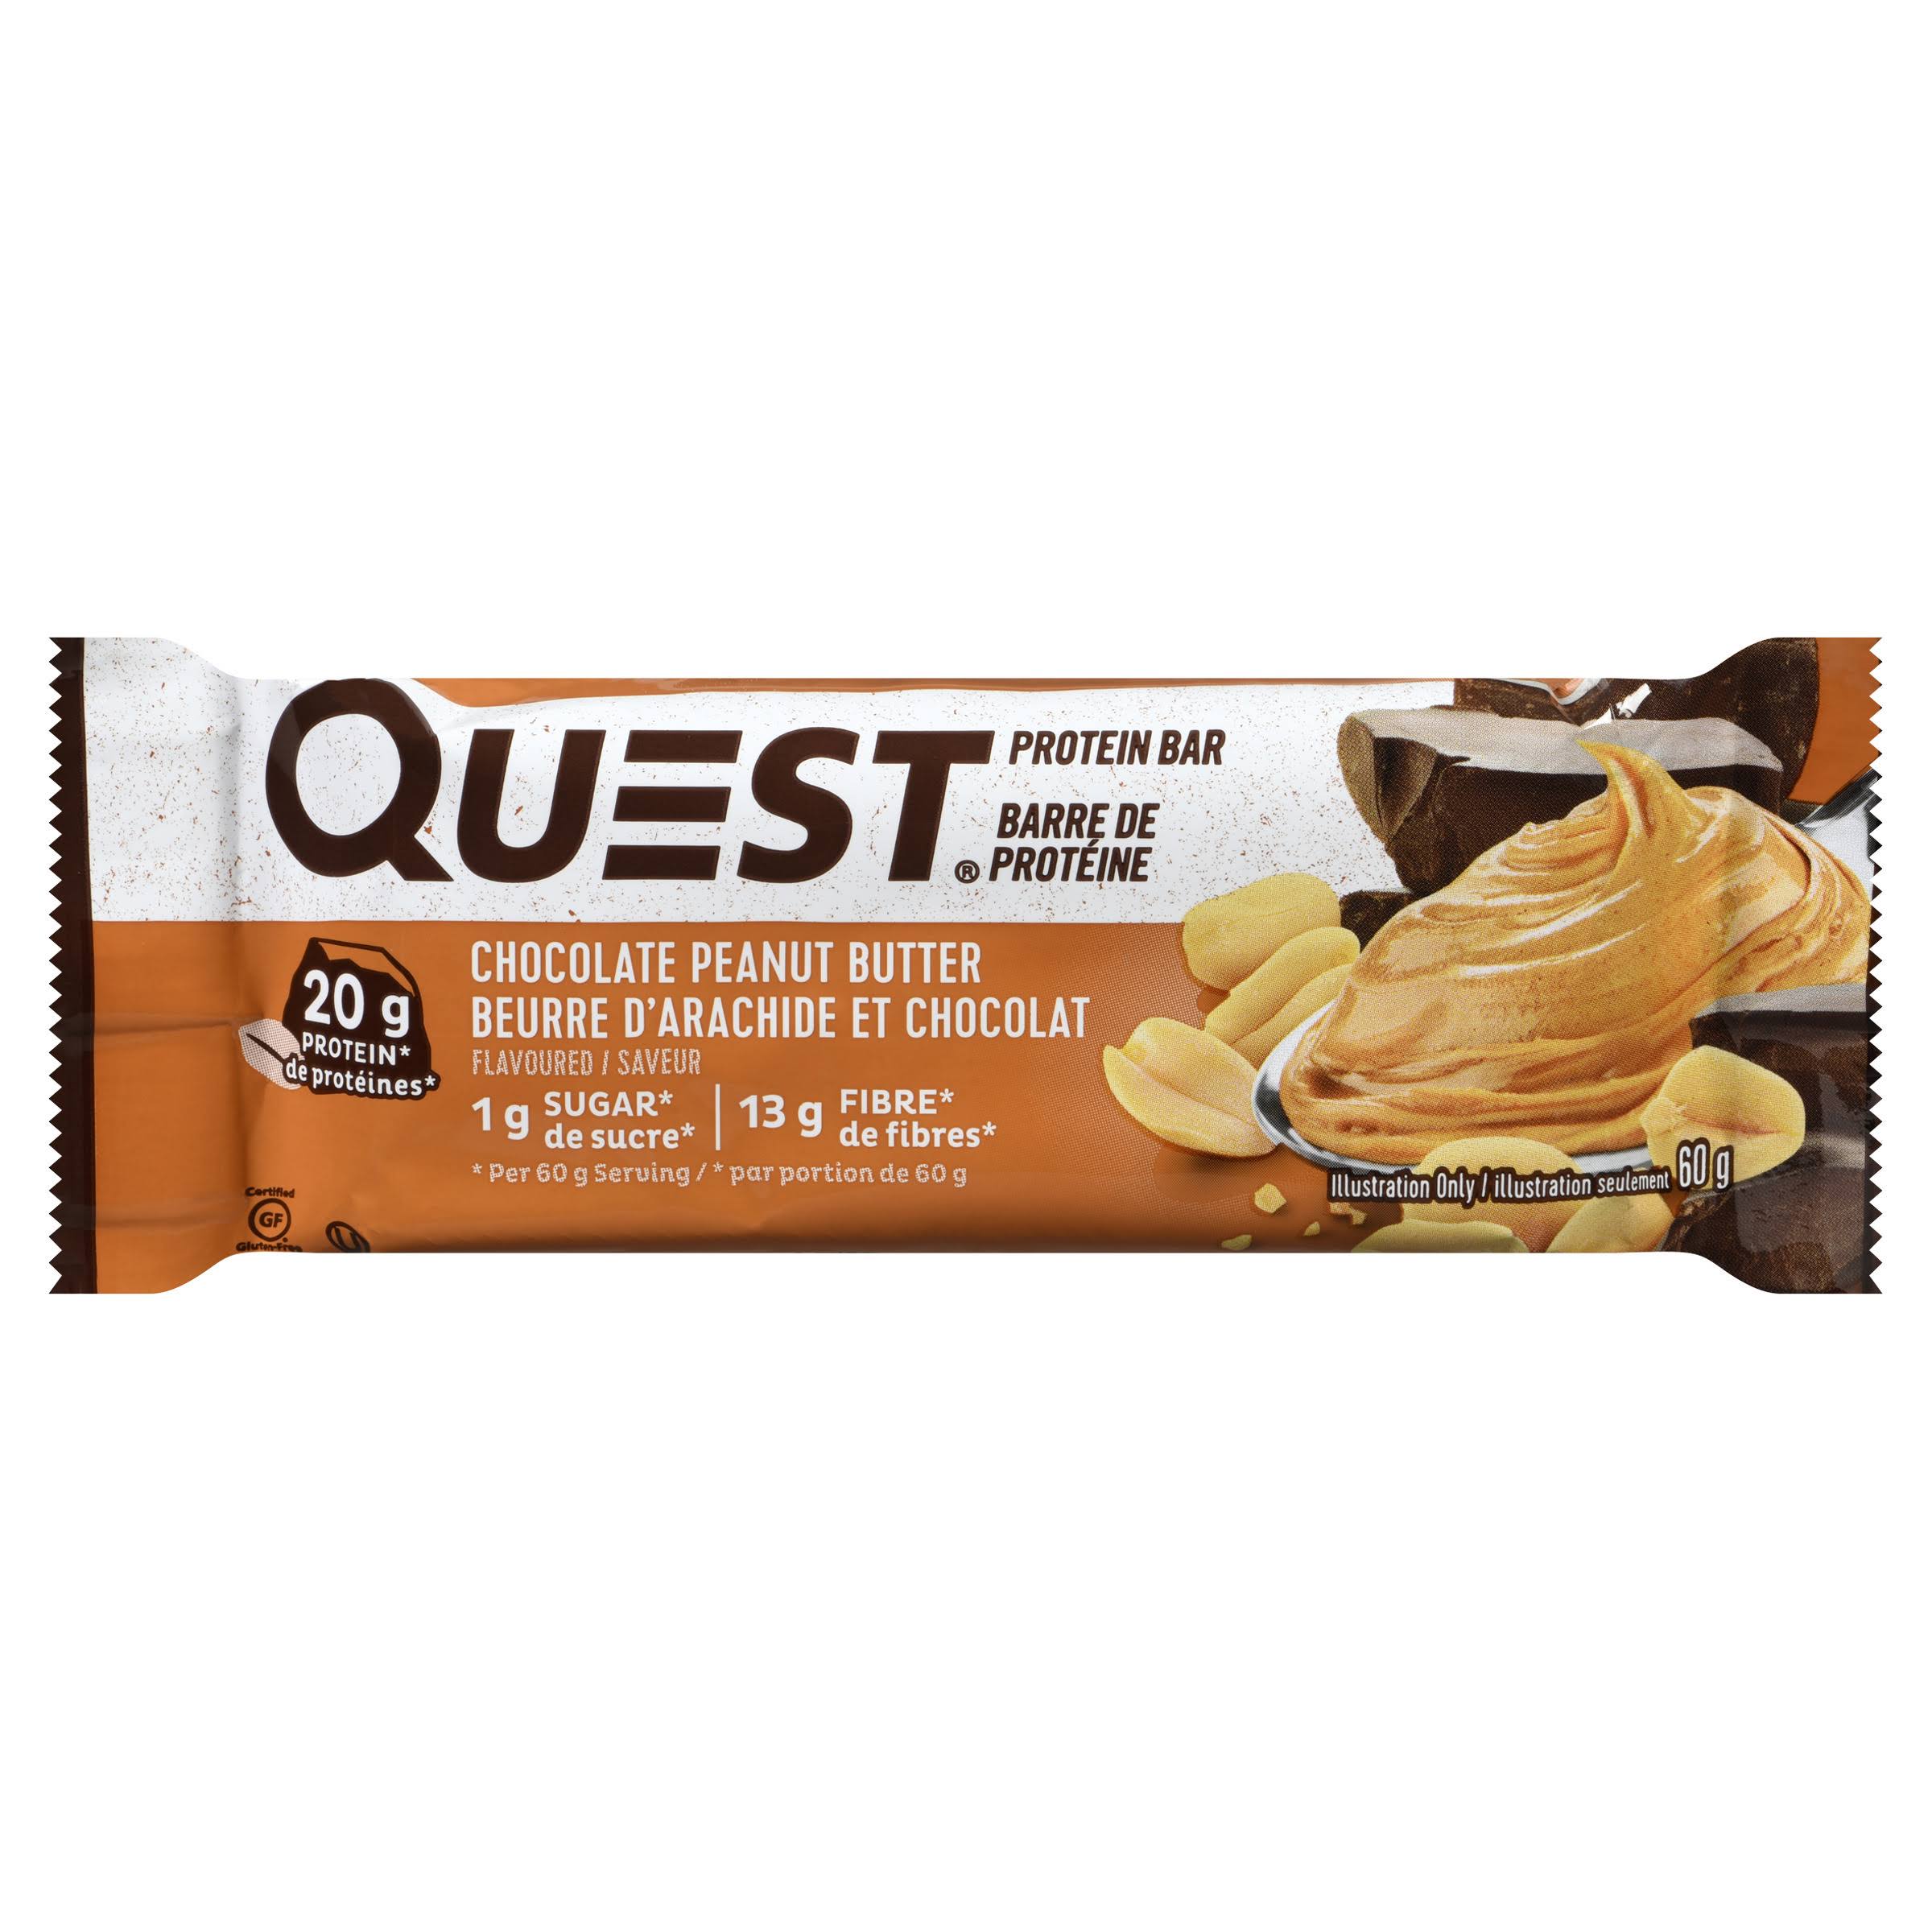 QUEST- Protein Bar CHOCOLATE PEANUT BUTTER